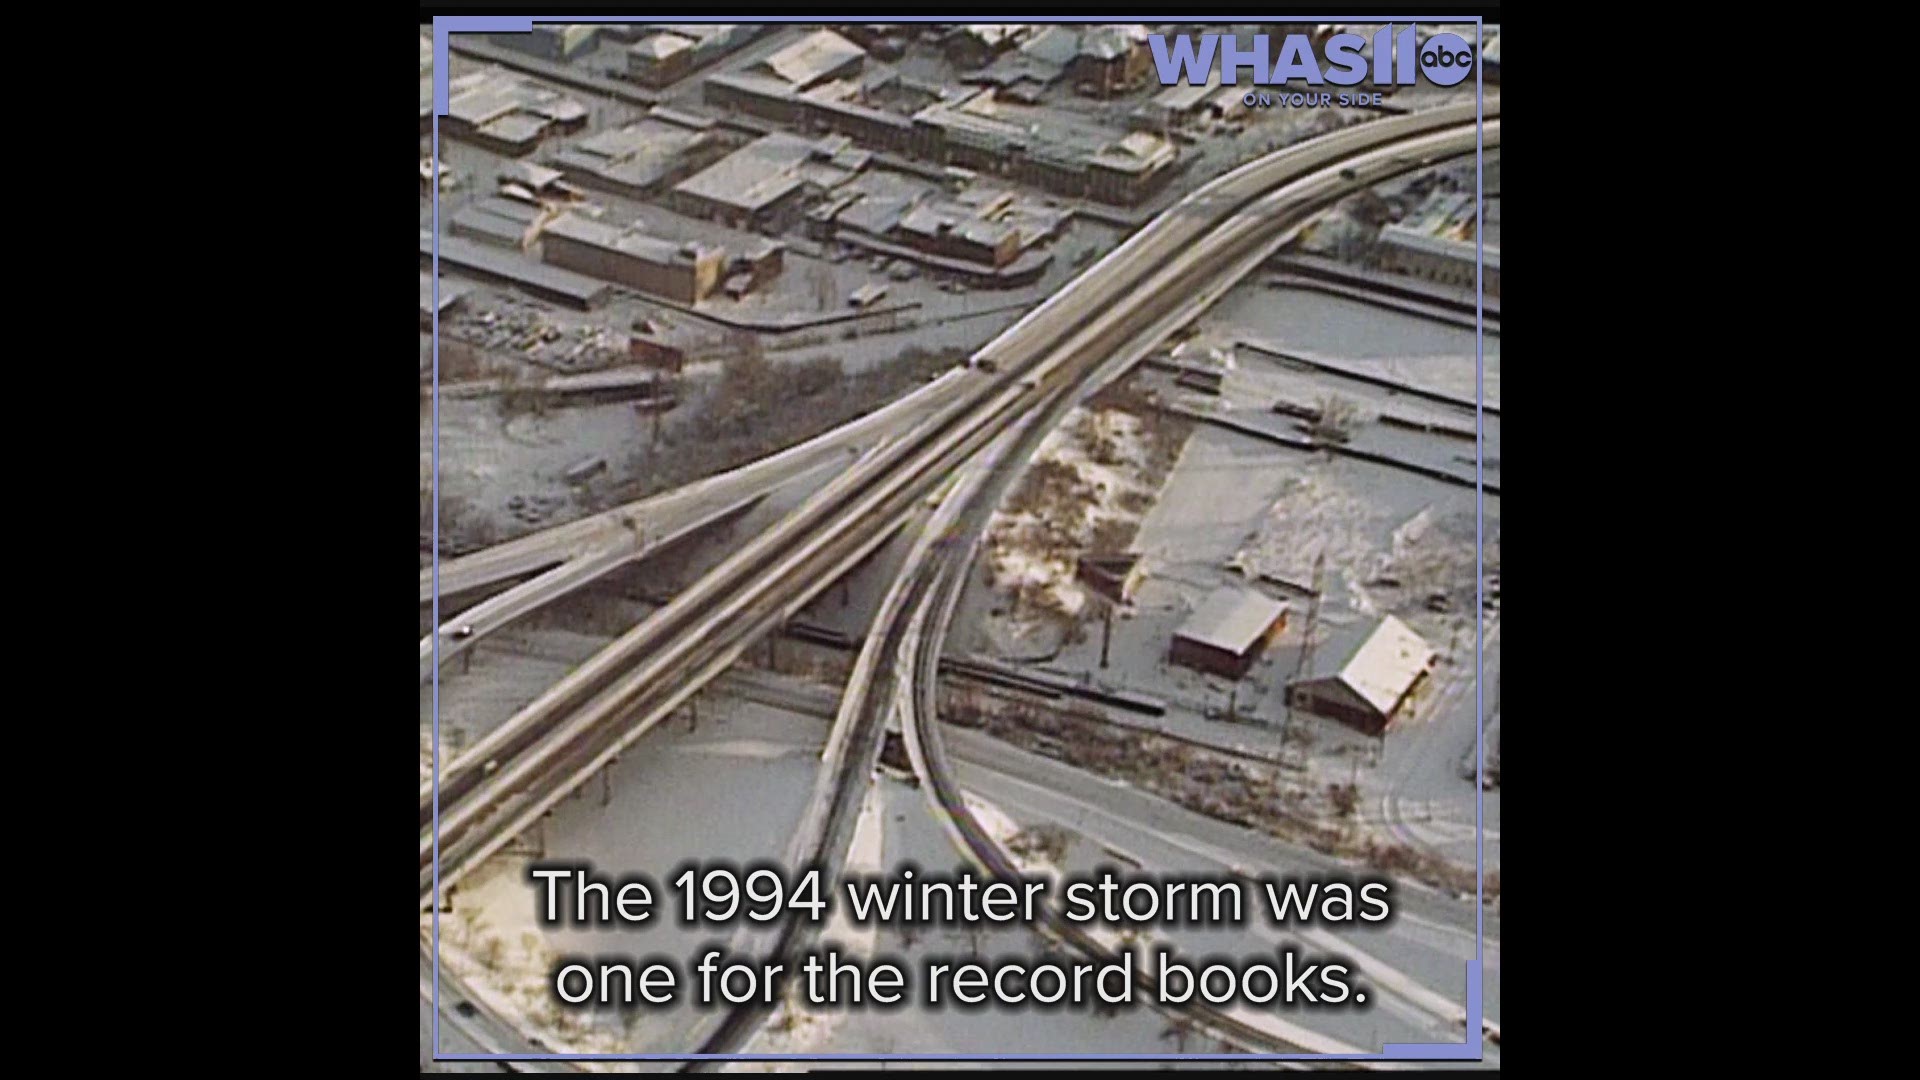 The city of Louisville and Jefferson County was hit with a record-breaking snowfall that left the area at a standstill on Jan. 17, 1994.